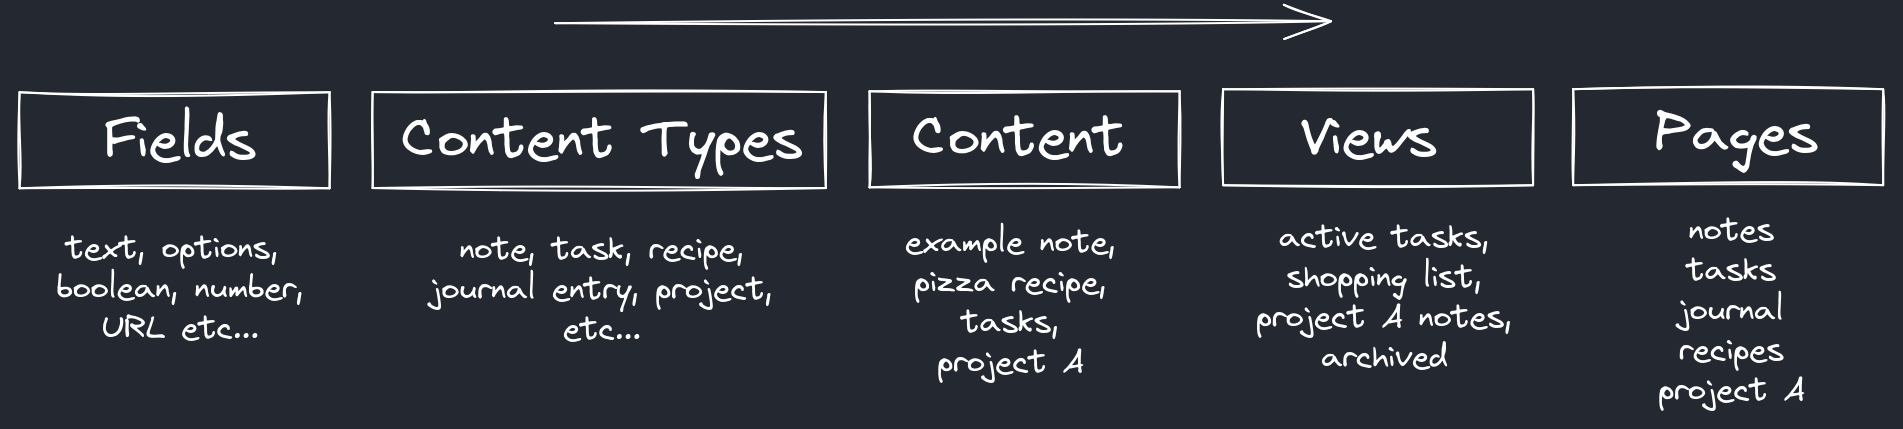 content-structure.png